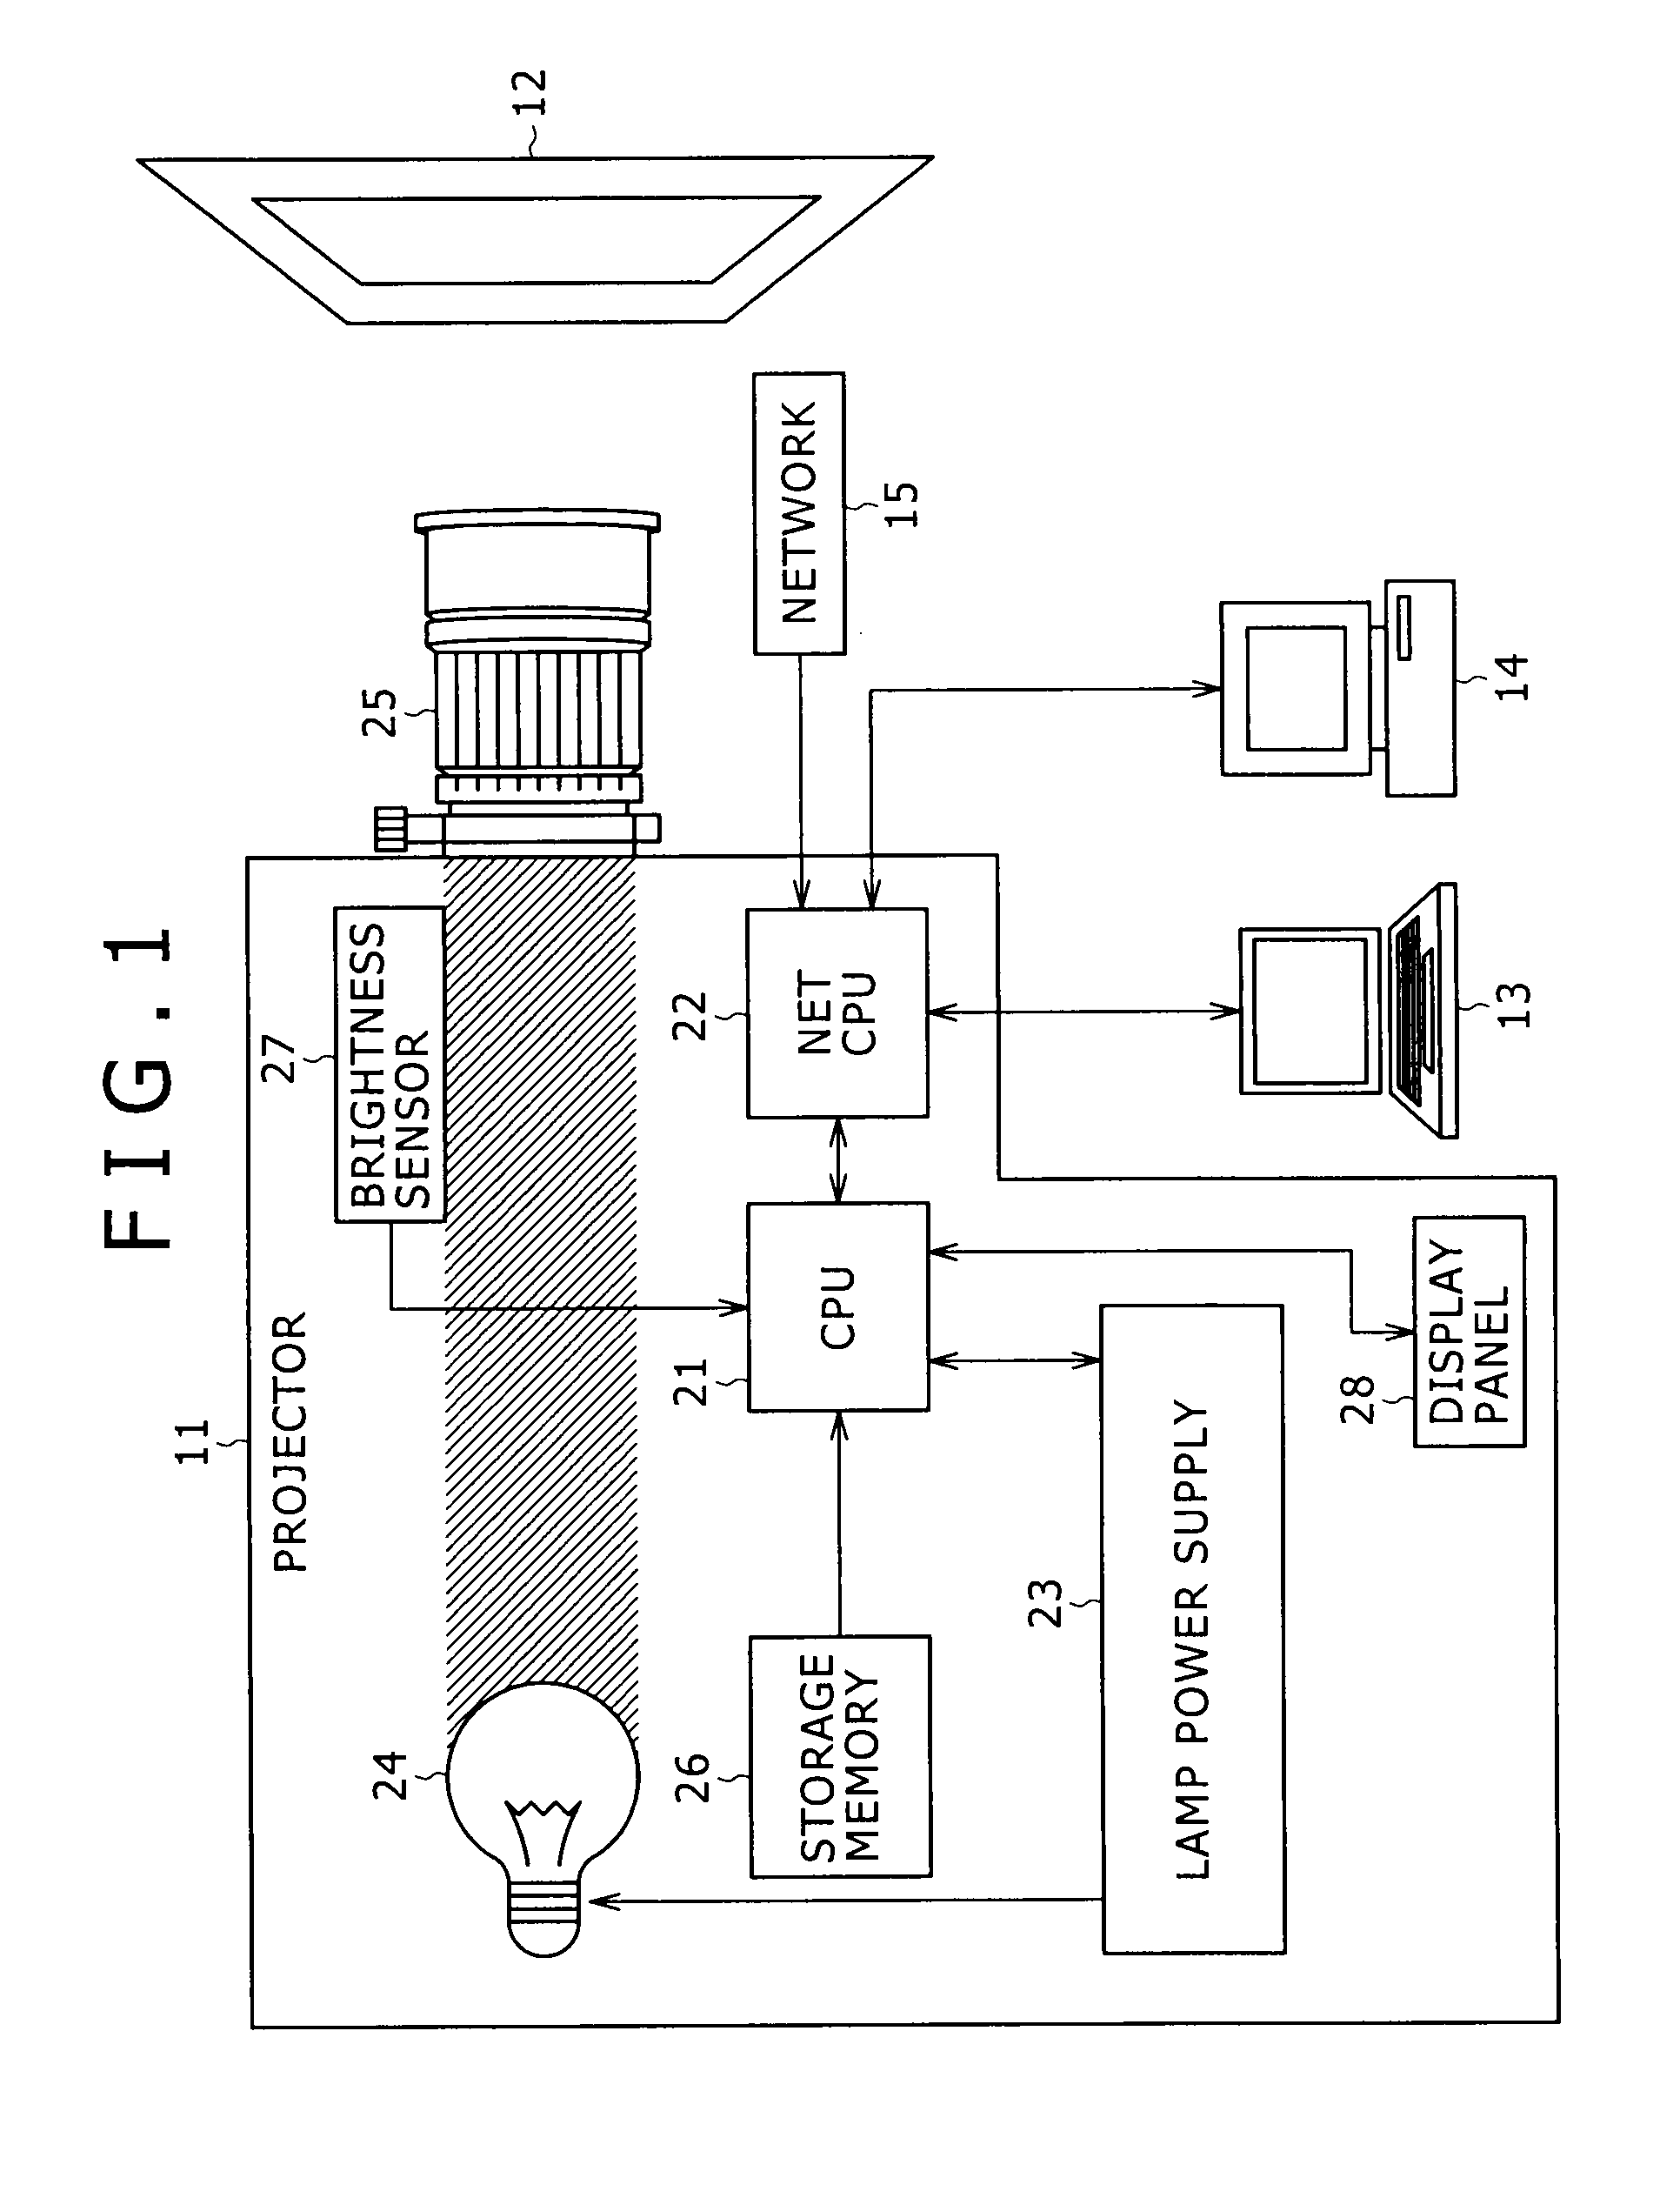 Image forming apparatus, method of controlling same, and program